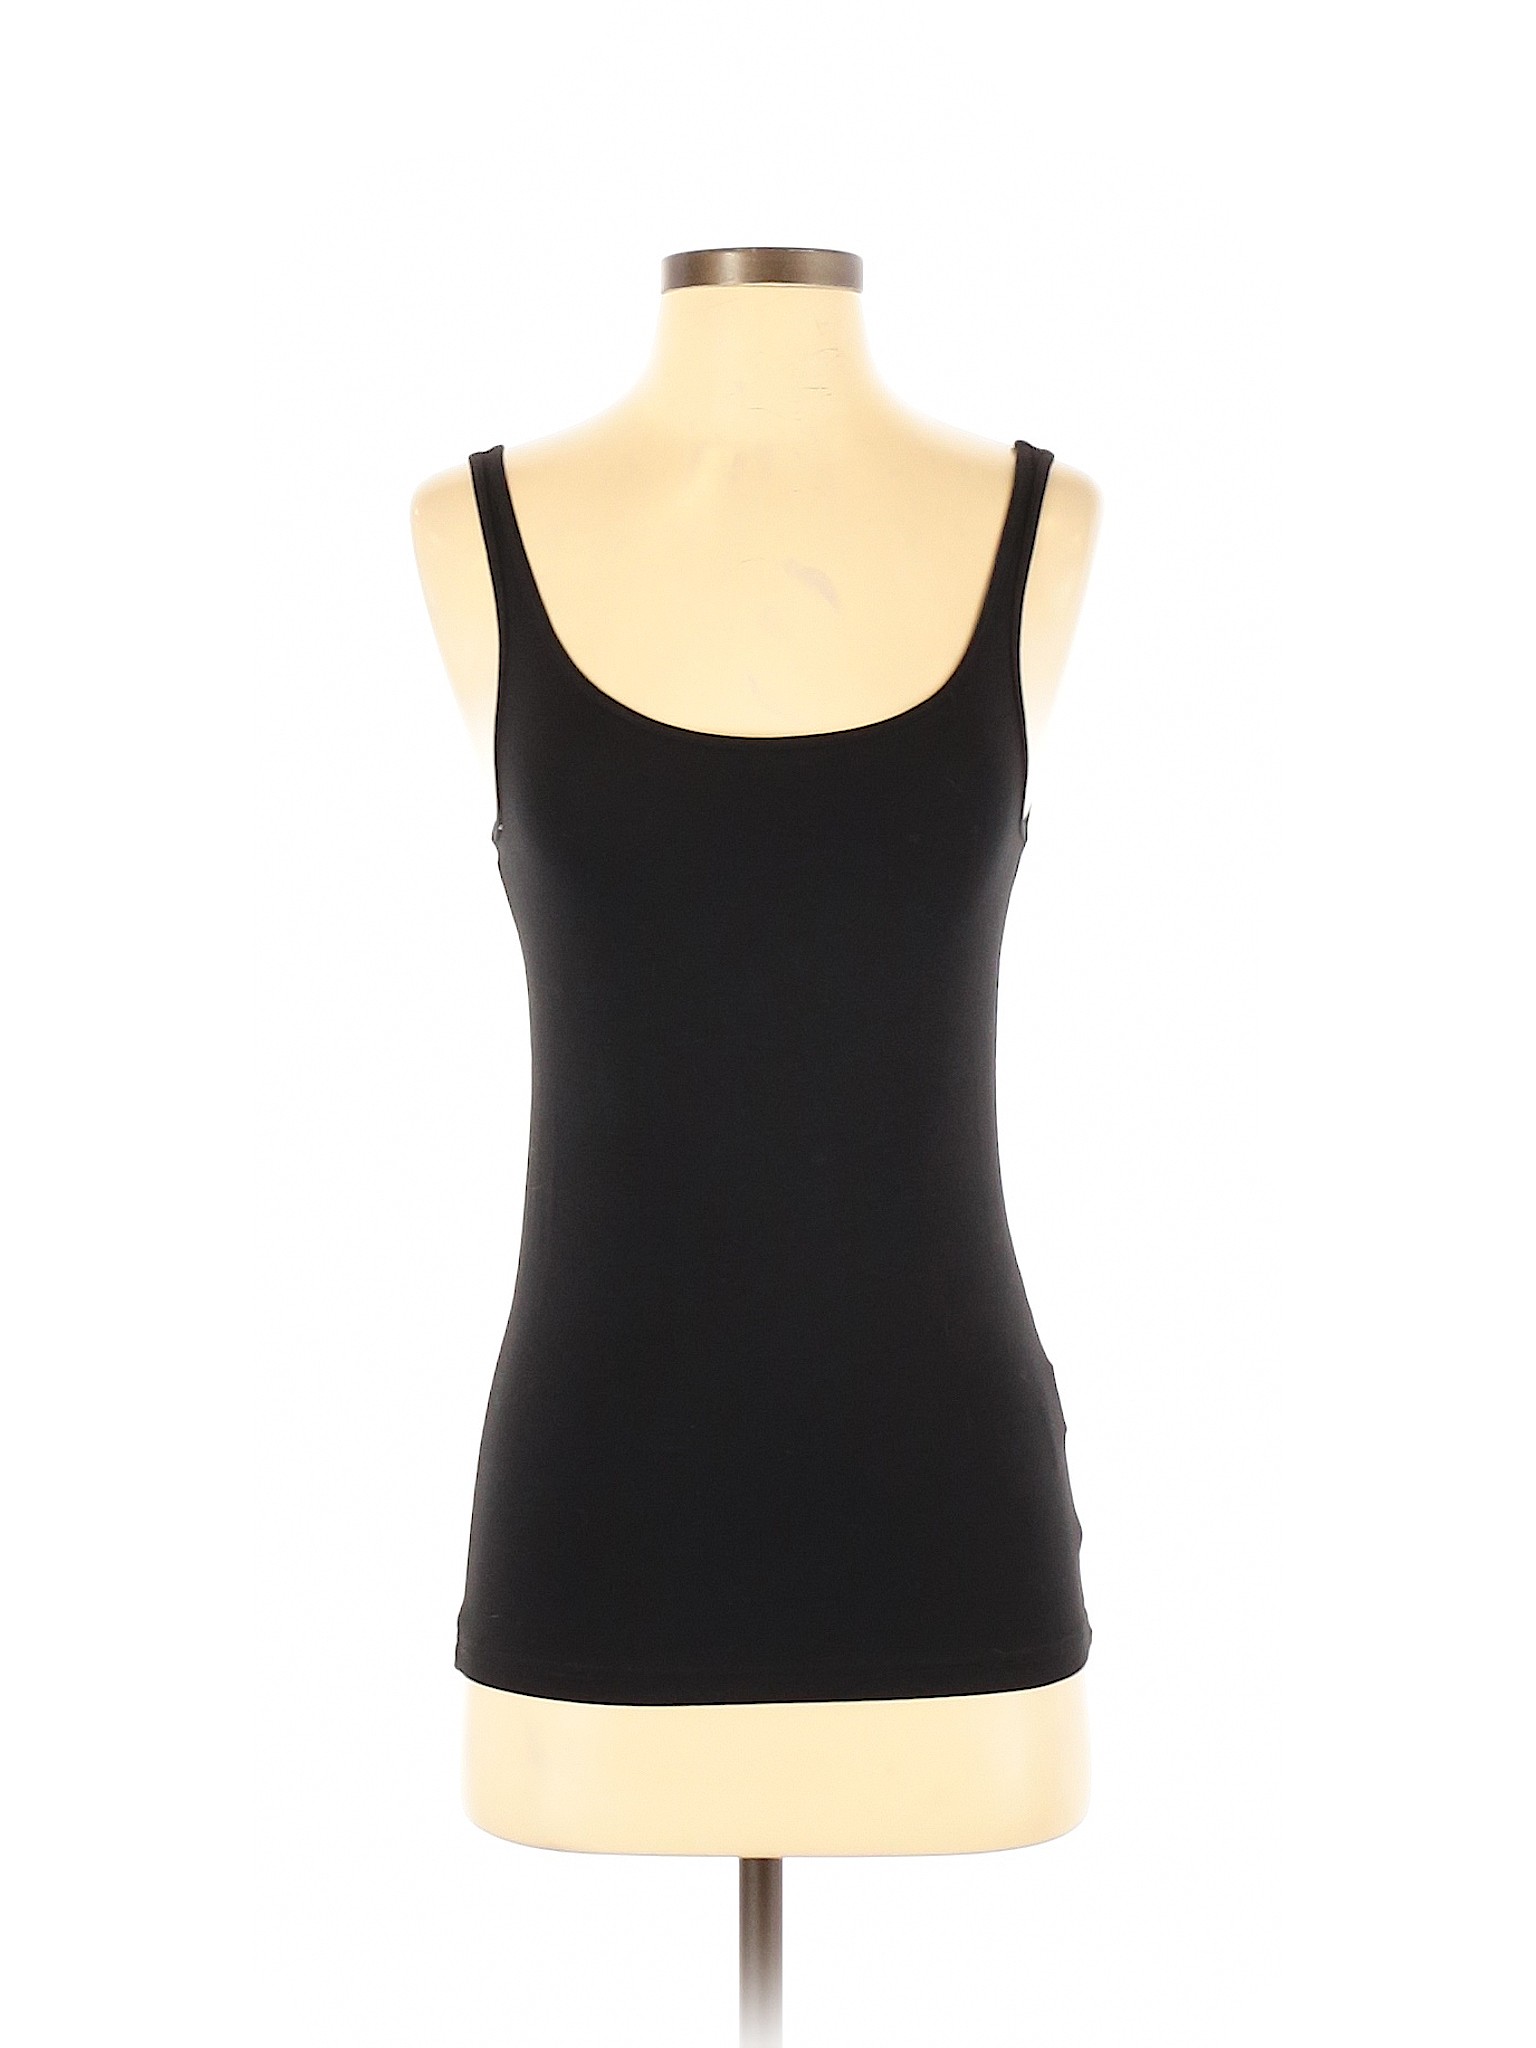 Divided by H&M Women Black Tank Top S | eBay